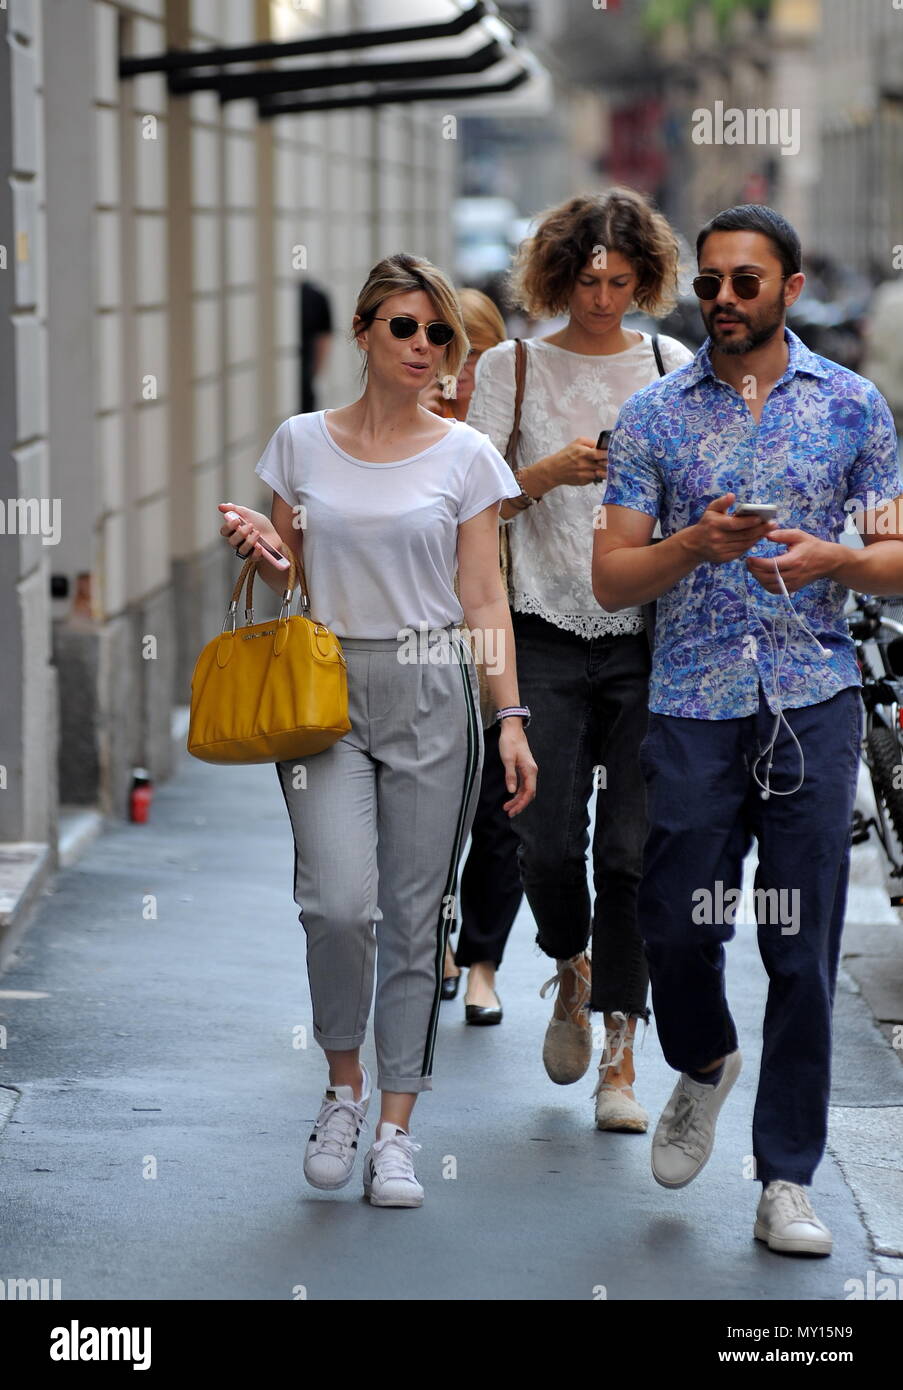 Milan, Euridice Axen walks in the center with a friend Euridice Axen, daughter of the Swedish actress Eva Axen and actor Adalberto Maria Merli, who however did not recognize her as a biological father, was the protagonist of several movies on TV as the series 'RIS 'on channel 5, fiction like' Centovetrine '-' Vivere '-' The 3 roses of Eva ', then dedicated itself to the theater, in 2015-2016 together with Stefania Sandrelli, then guest star in the TV series' The Young Pope ' by Paolo Sorrentino. In 2018 he was one of the protagonists of the film 'LORO', (a very controversial film about Silvio Stock Photo